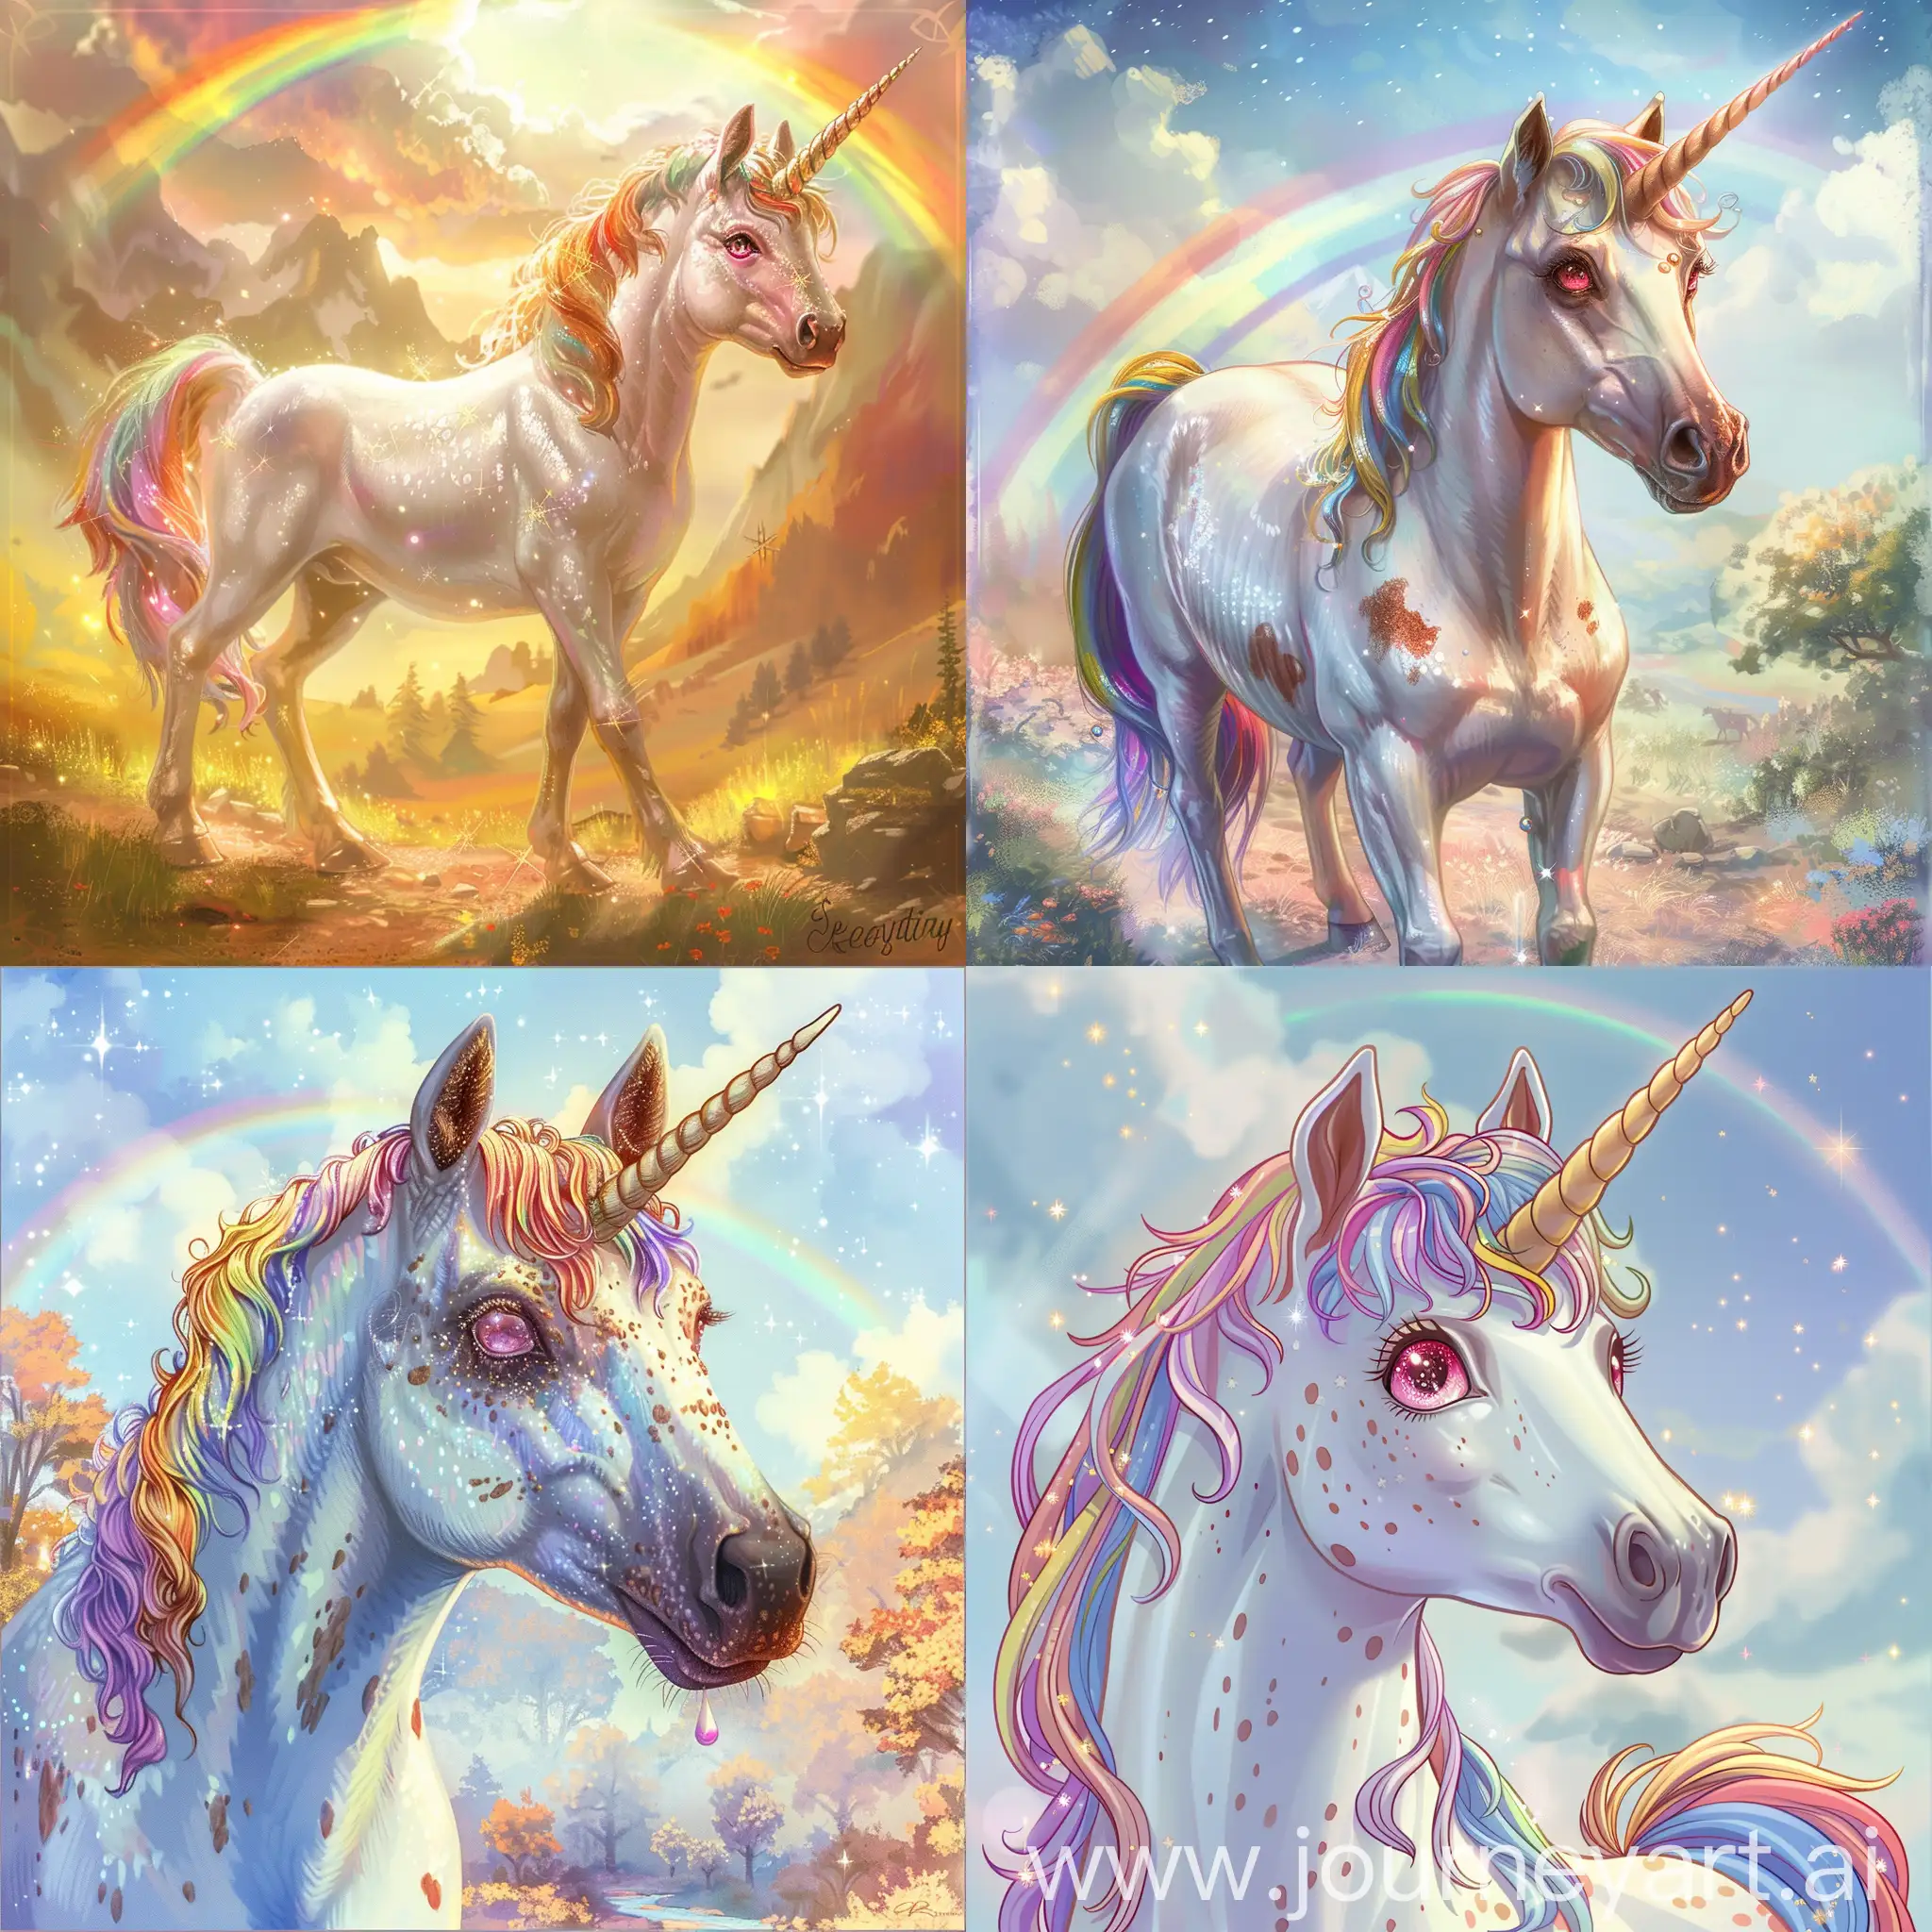 In the enchanted land of Everglow, where rainbows danced across the sky and stars twinkled in the daylight, lived a very young unicorn named Starlight. With her shimmering white coat, with few brown spots, pink eyes, rainbow  mane, rainbow tail,a horn that sparkled like the morning dew, Starlight was full of curiosity and bravery.